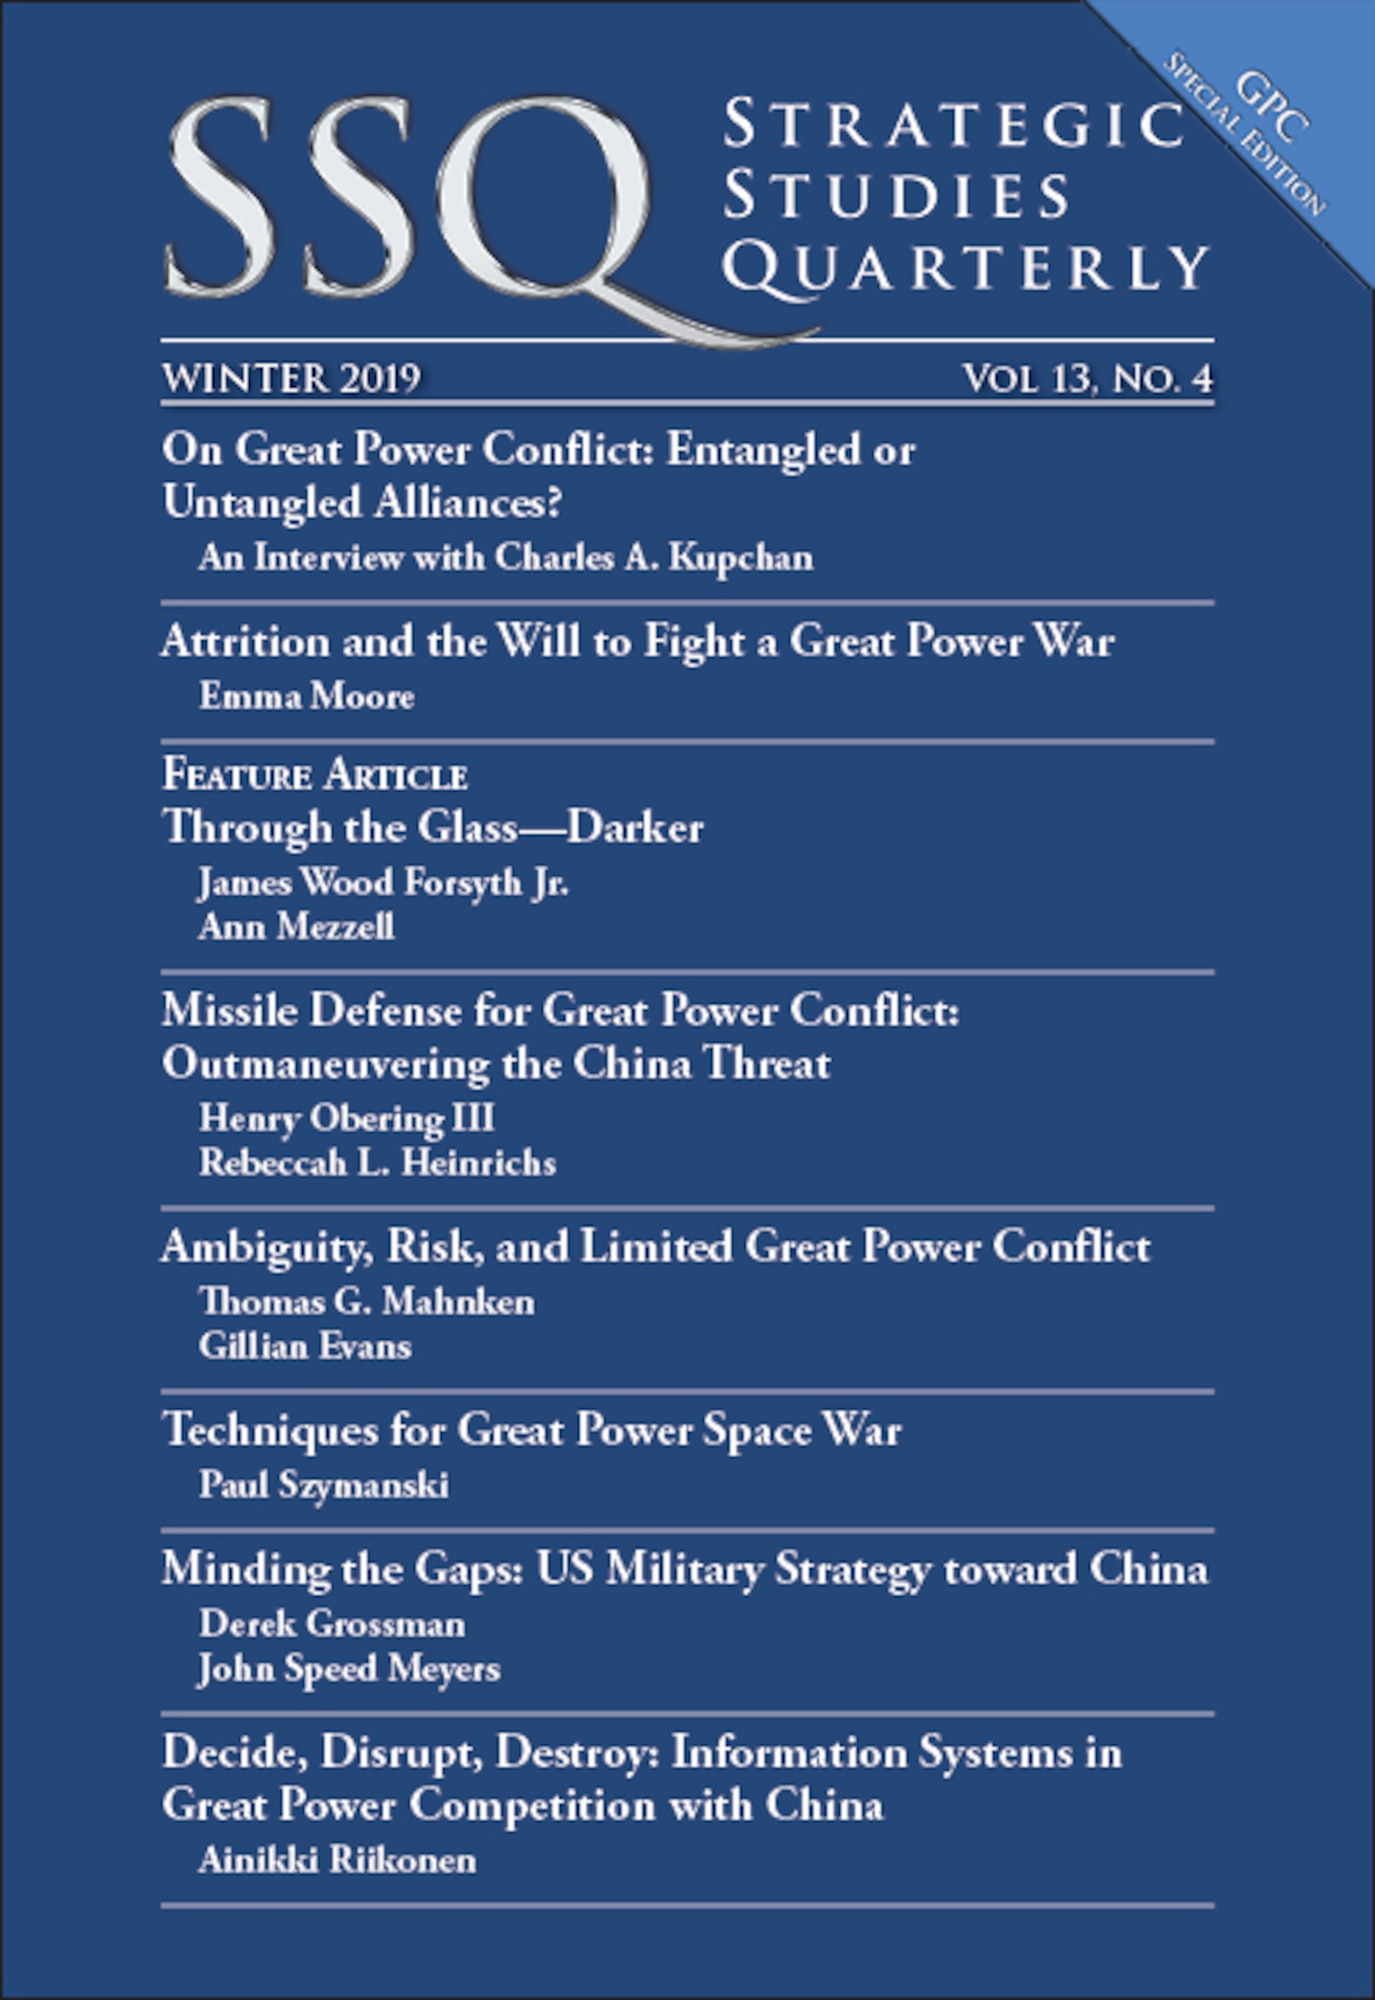 Air University Press has released the Winter 2019 Great Power Conflict Special Edition of Strategic Studies Quarterly. The edition is available at www.airuniversity.af.edu/SSQ.